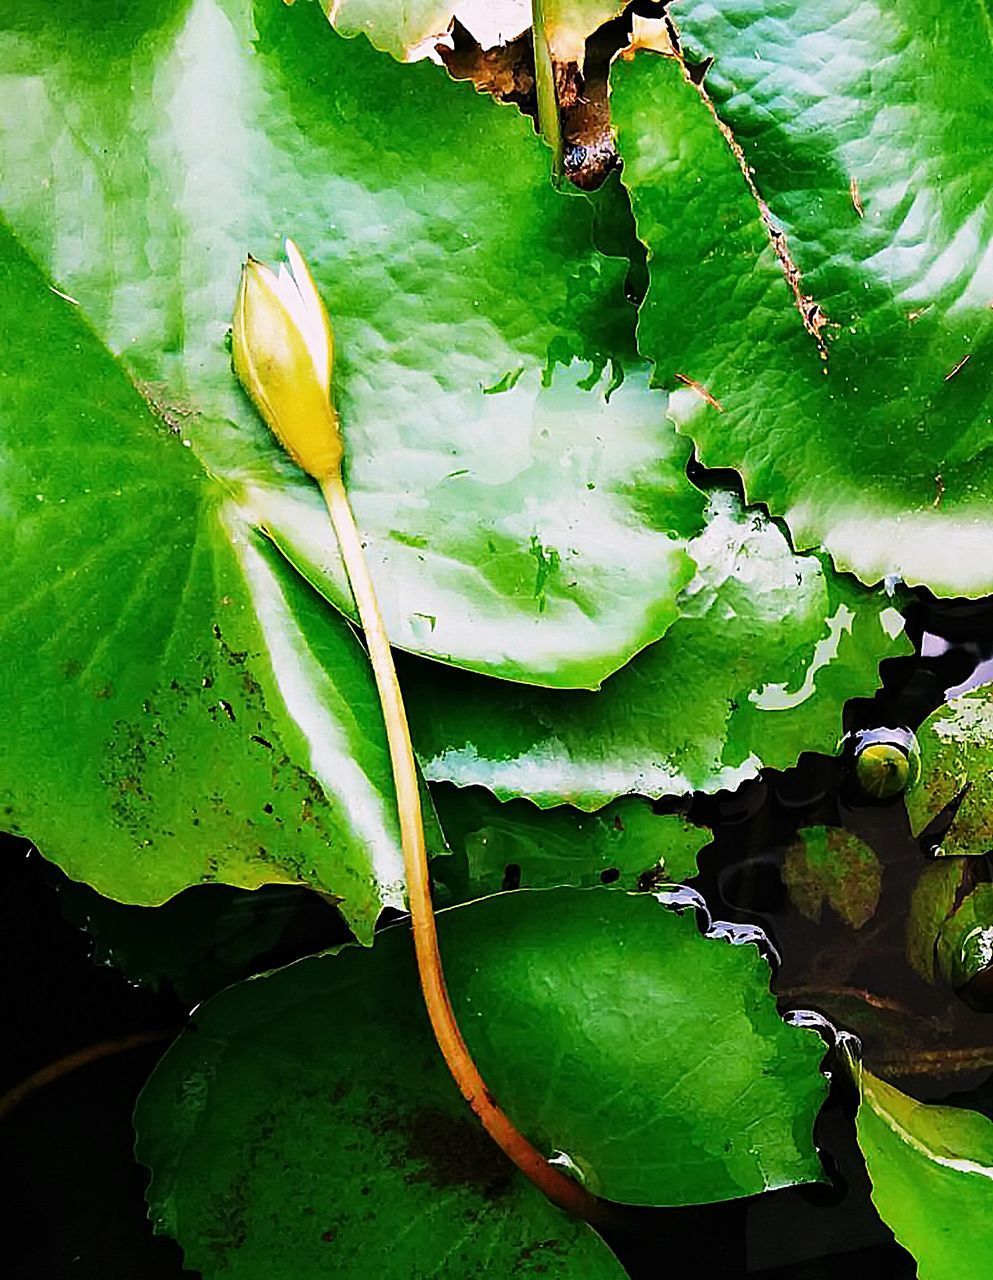 HIGH ANGLE VIEW OF WATER LILY LEAVES ON PLANT